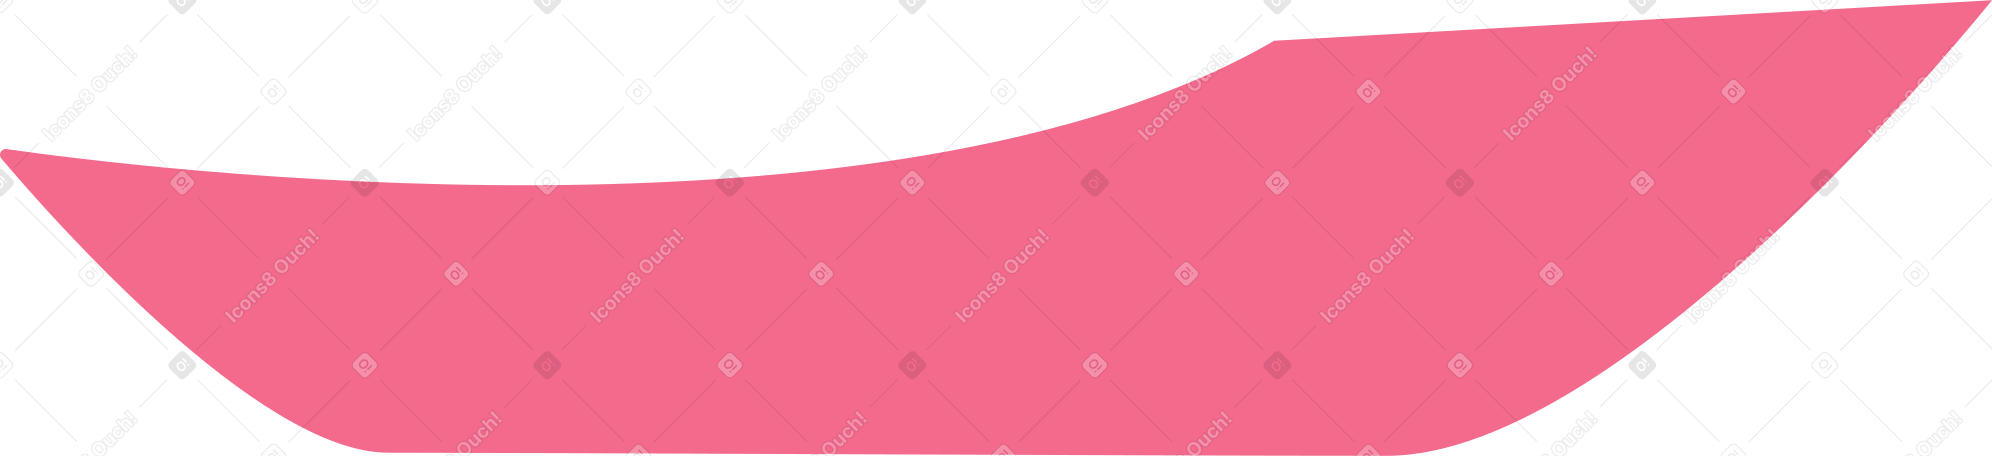 bottom of the pink pillow Illustration in PNG, SVG